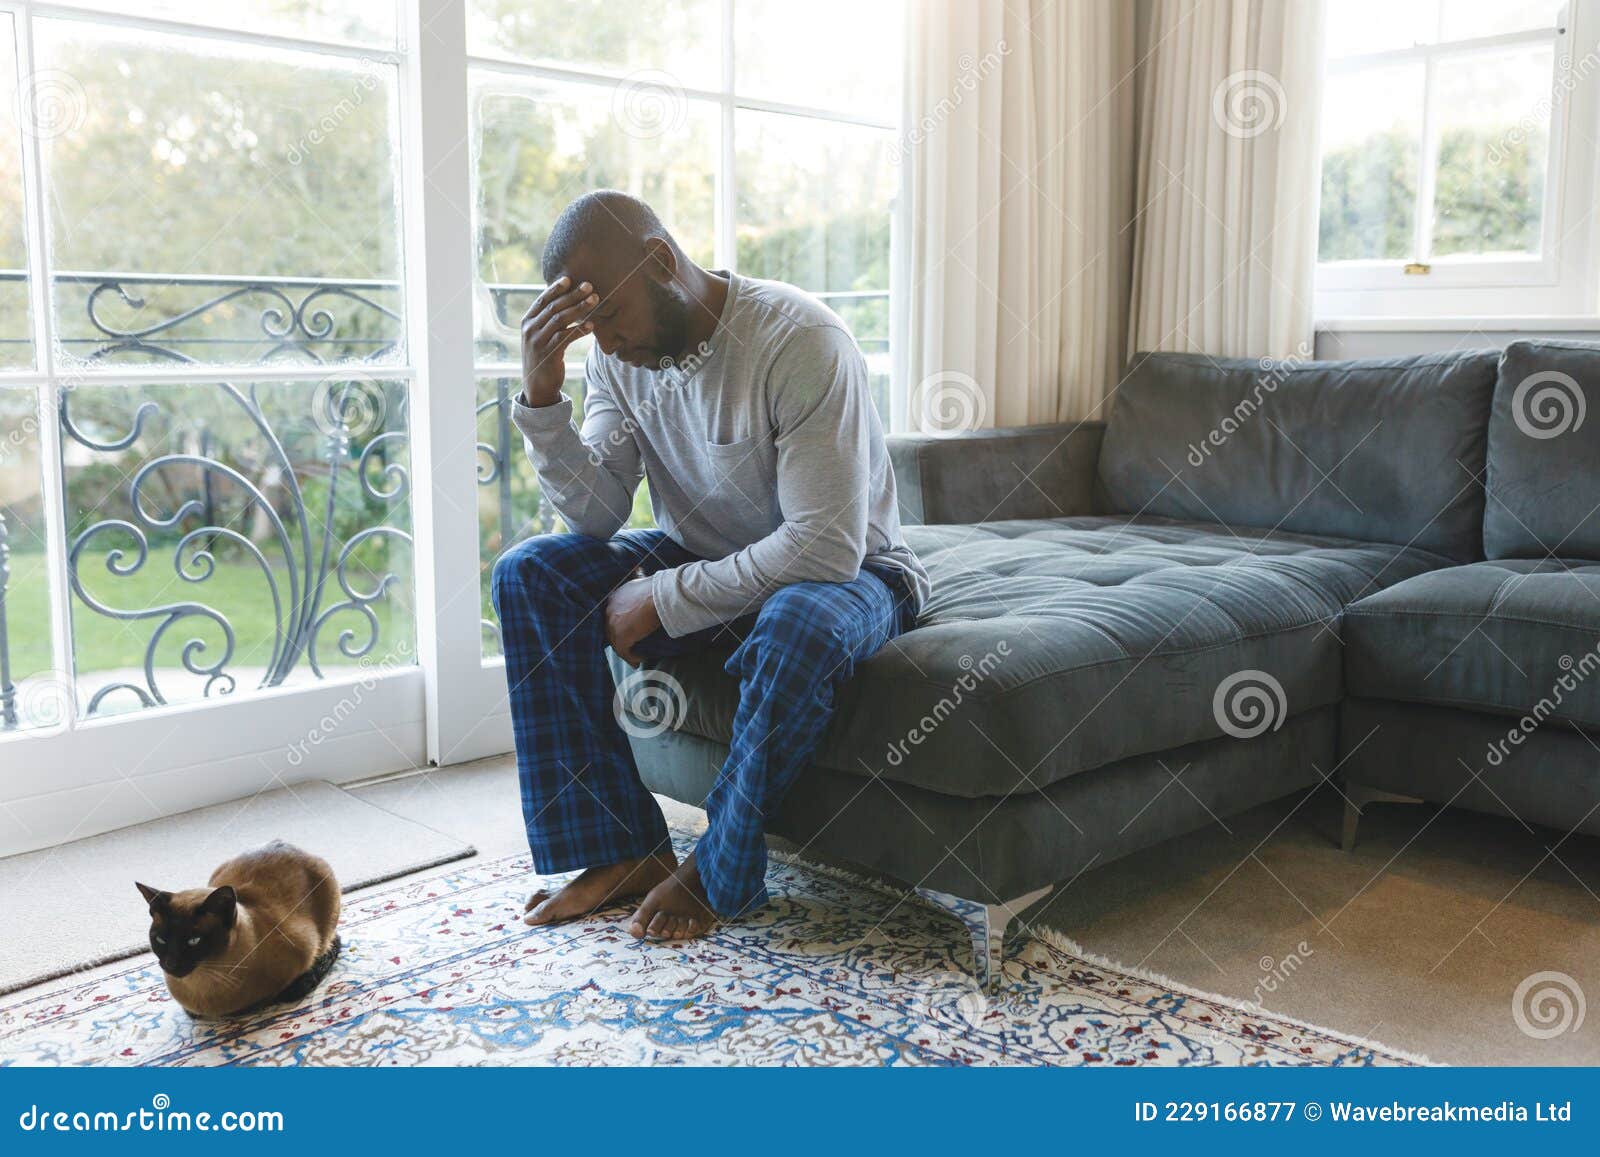 https://thumbs.dreamstime.com/z/worried-sad-african-american-man-thinking-sitting-couch-holding-head-living-room-cat-worried-sad-african-american-man-229166877.jpg